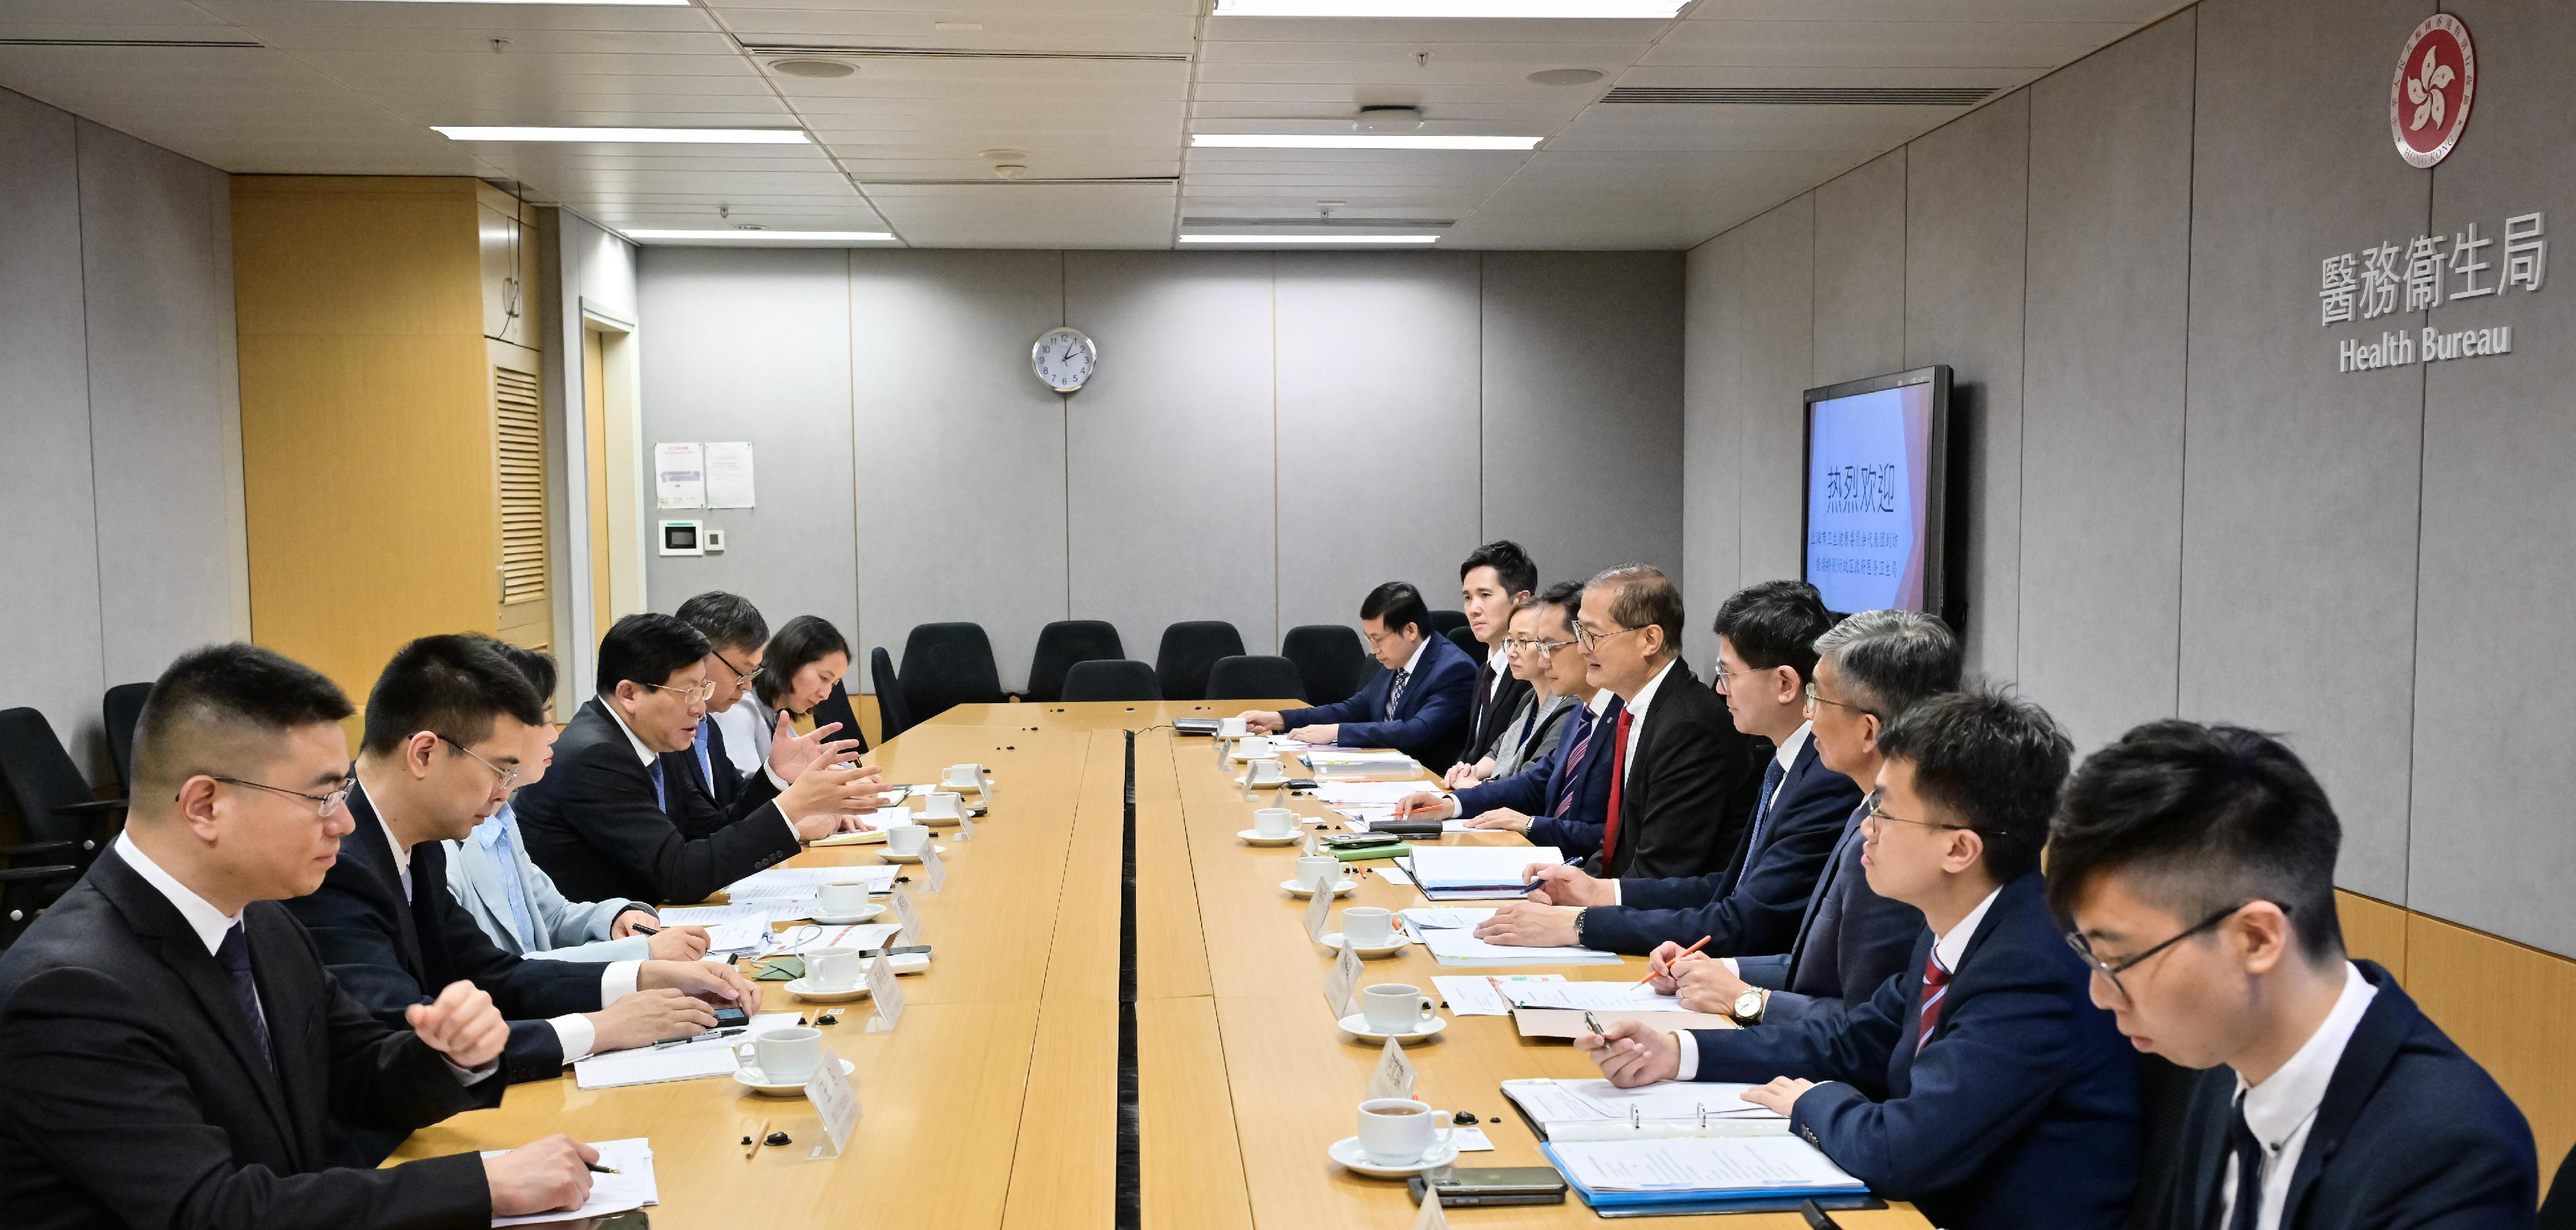 The Secretary for Health, Professor Lo Chung-mau (fifth right), meets with a delegation led by the Director General of the Shanghai Municipal Health Commission, Professor Wen Daxiang (fourth left), today (April 26), with the Director of Health, Dr Ronald Lam (sixth right); the Controller of Regulatory Affairs of the Department of Health, Dr Amy Chiu (seventh right); the Chief Executive of the Hospital Authority (HA), Dr Tony Ko (fourth right); and the Director of Cluster Services of the HA, Dr Simon Tang (third right), in attendance.